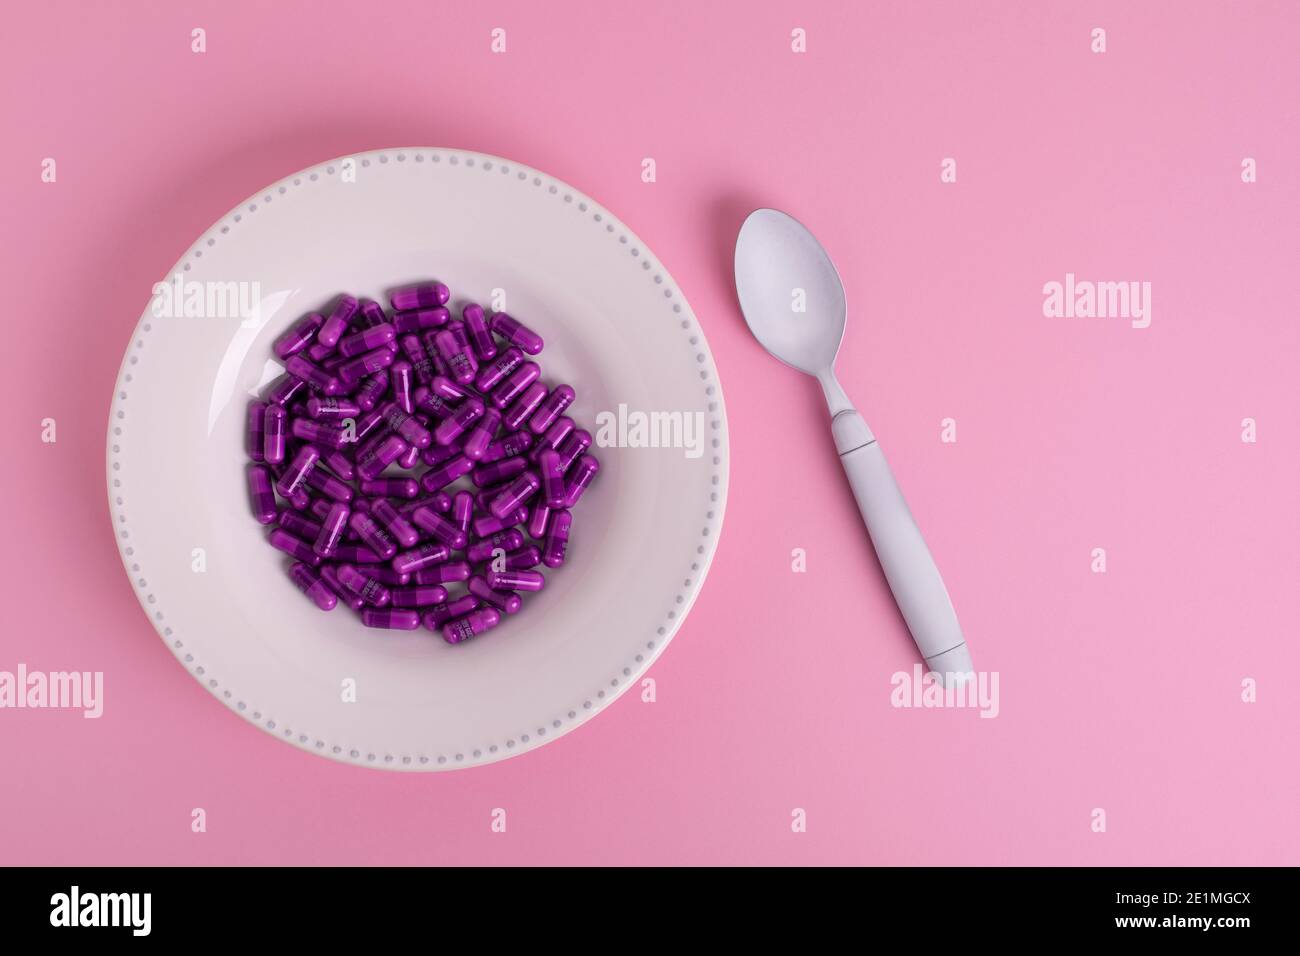 White plate filled with pills, addiction problem concept Stock Photo